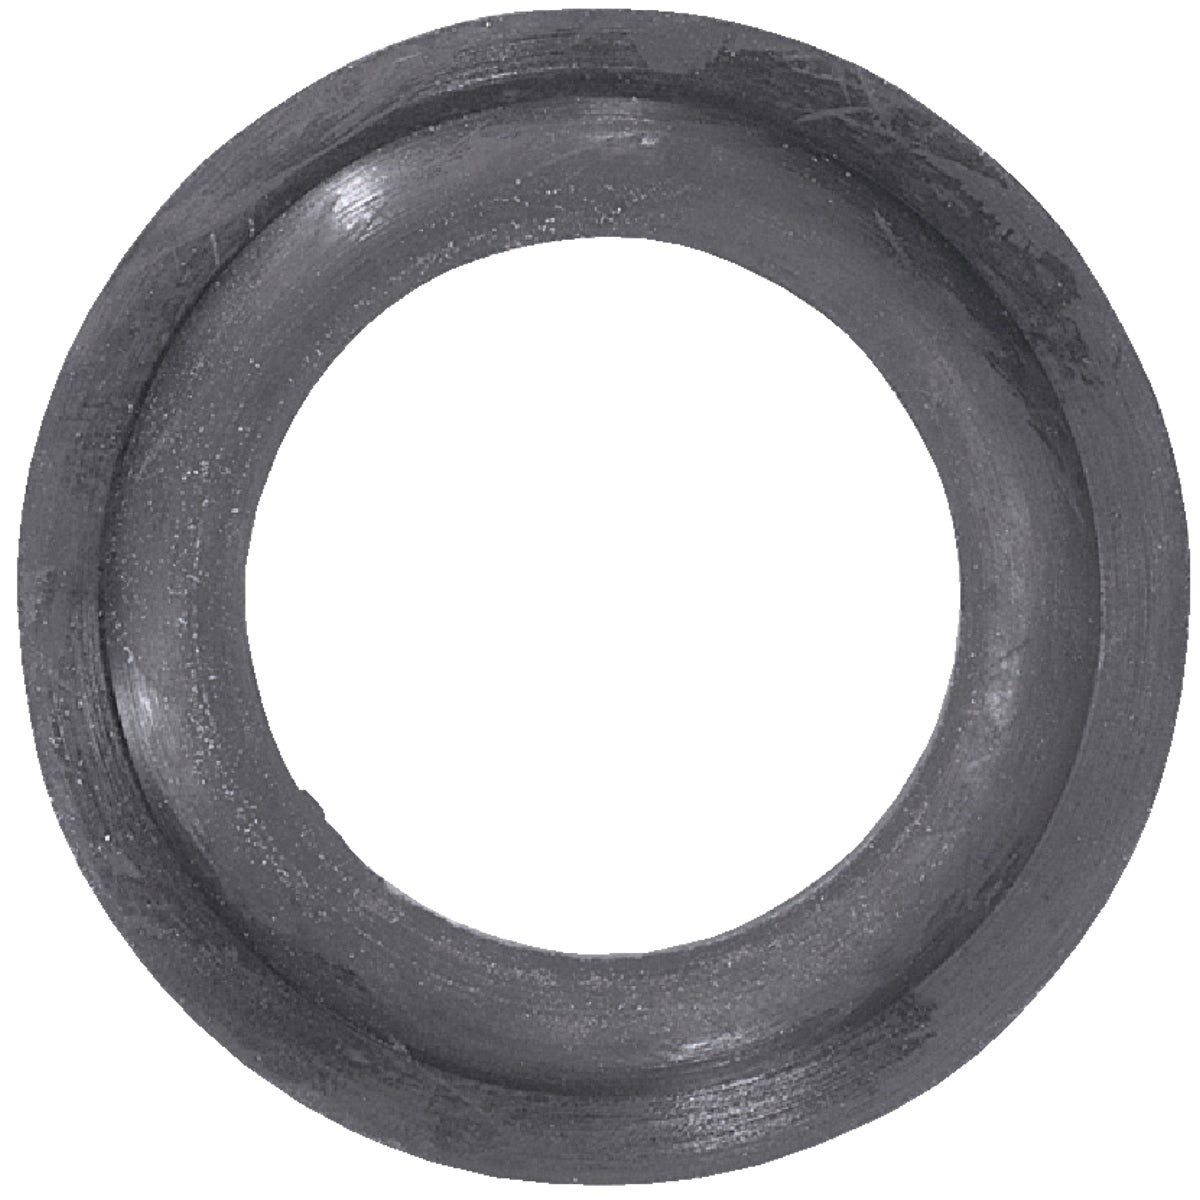 Danco Replacement Dielectric Union Washer